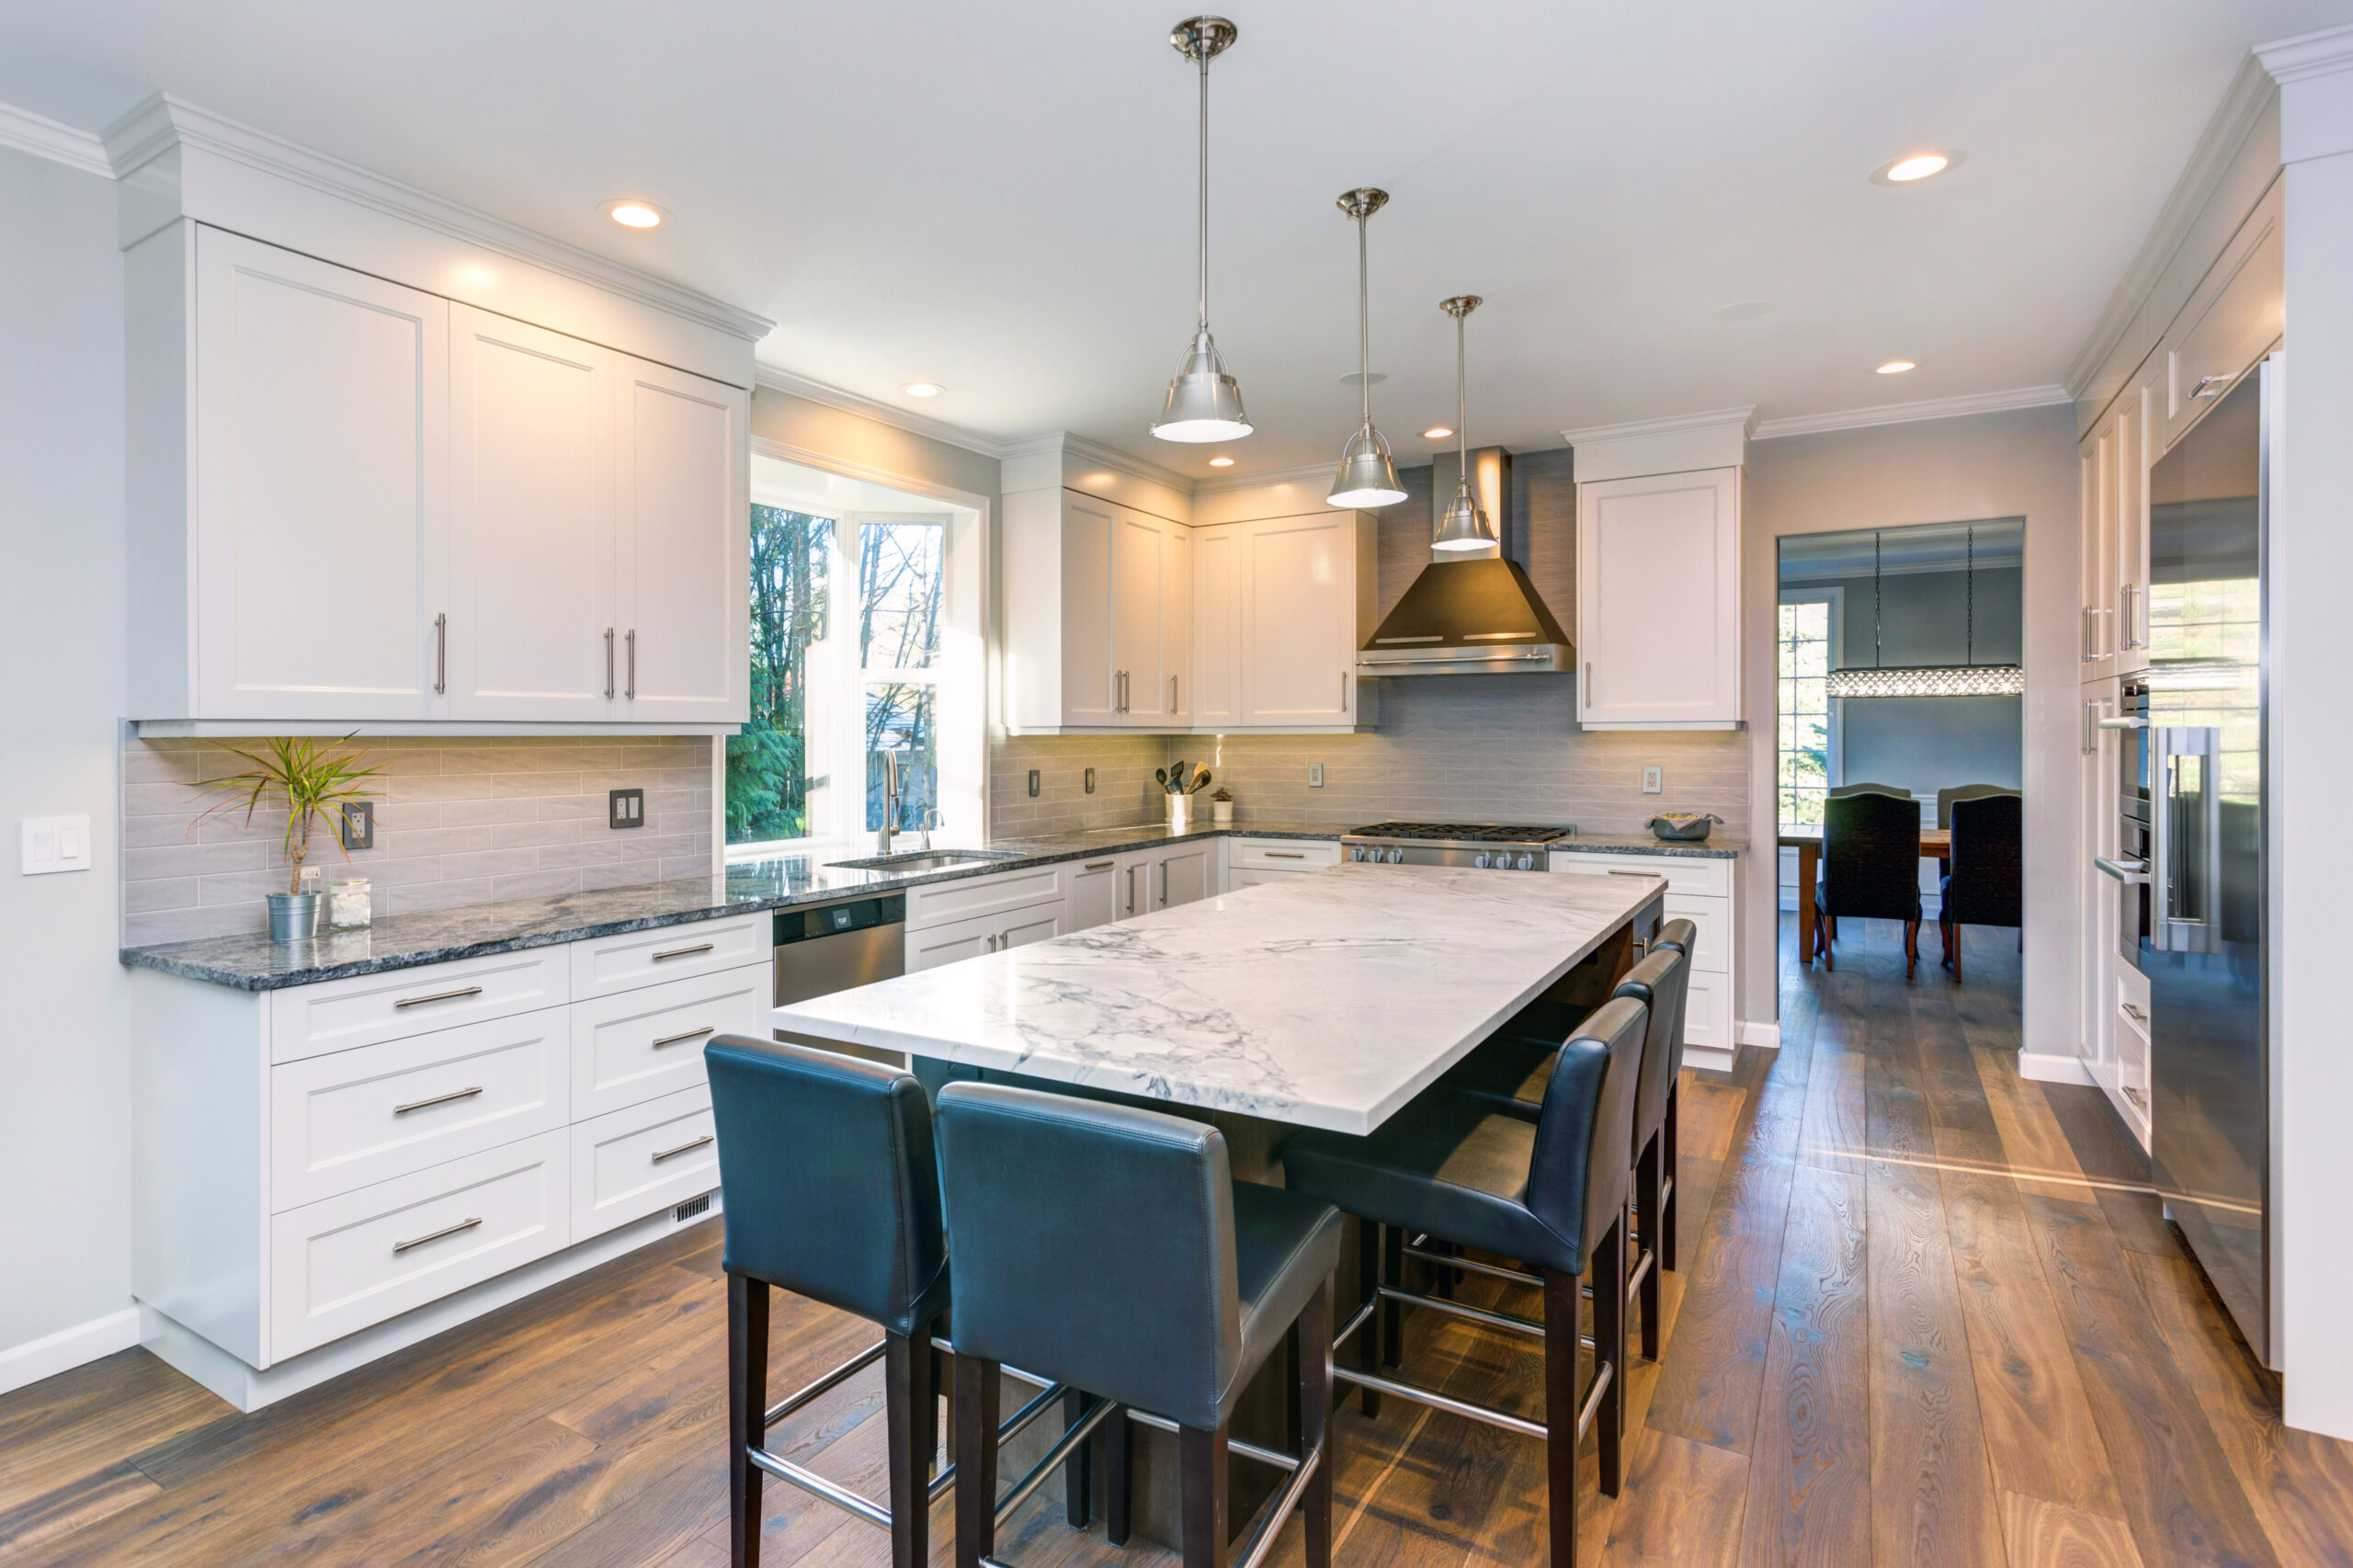 Luxury home interior boasts Beautiful black and white kitchen with custom white shaker cabinets, endless marble topped Kitchen Remodel Pricing Guide island with black leather stools over wide planked hardwood floor.